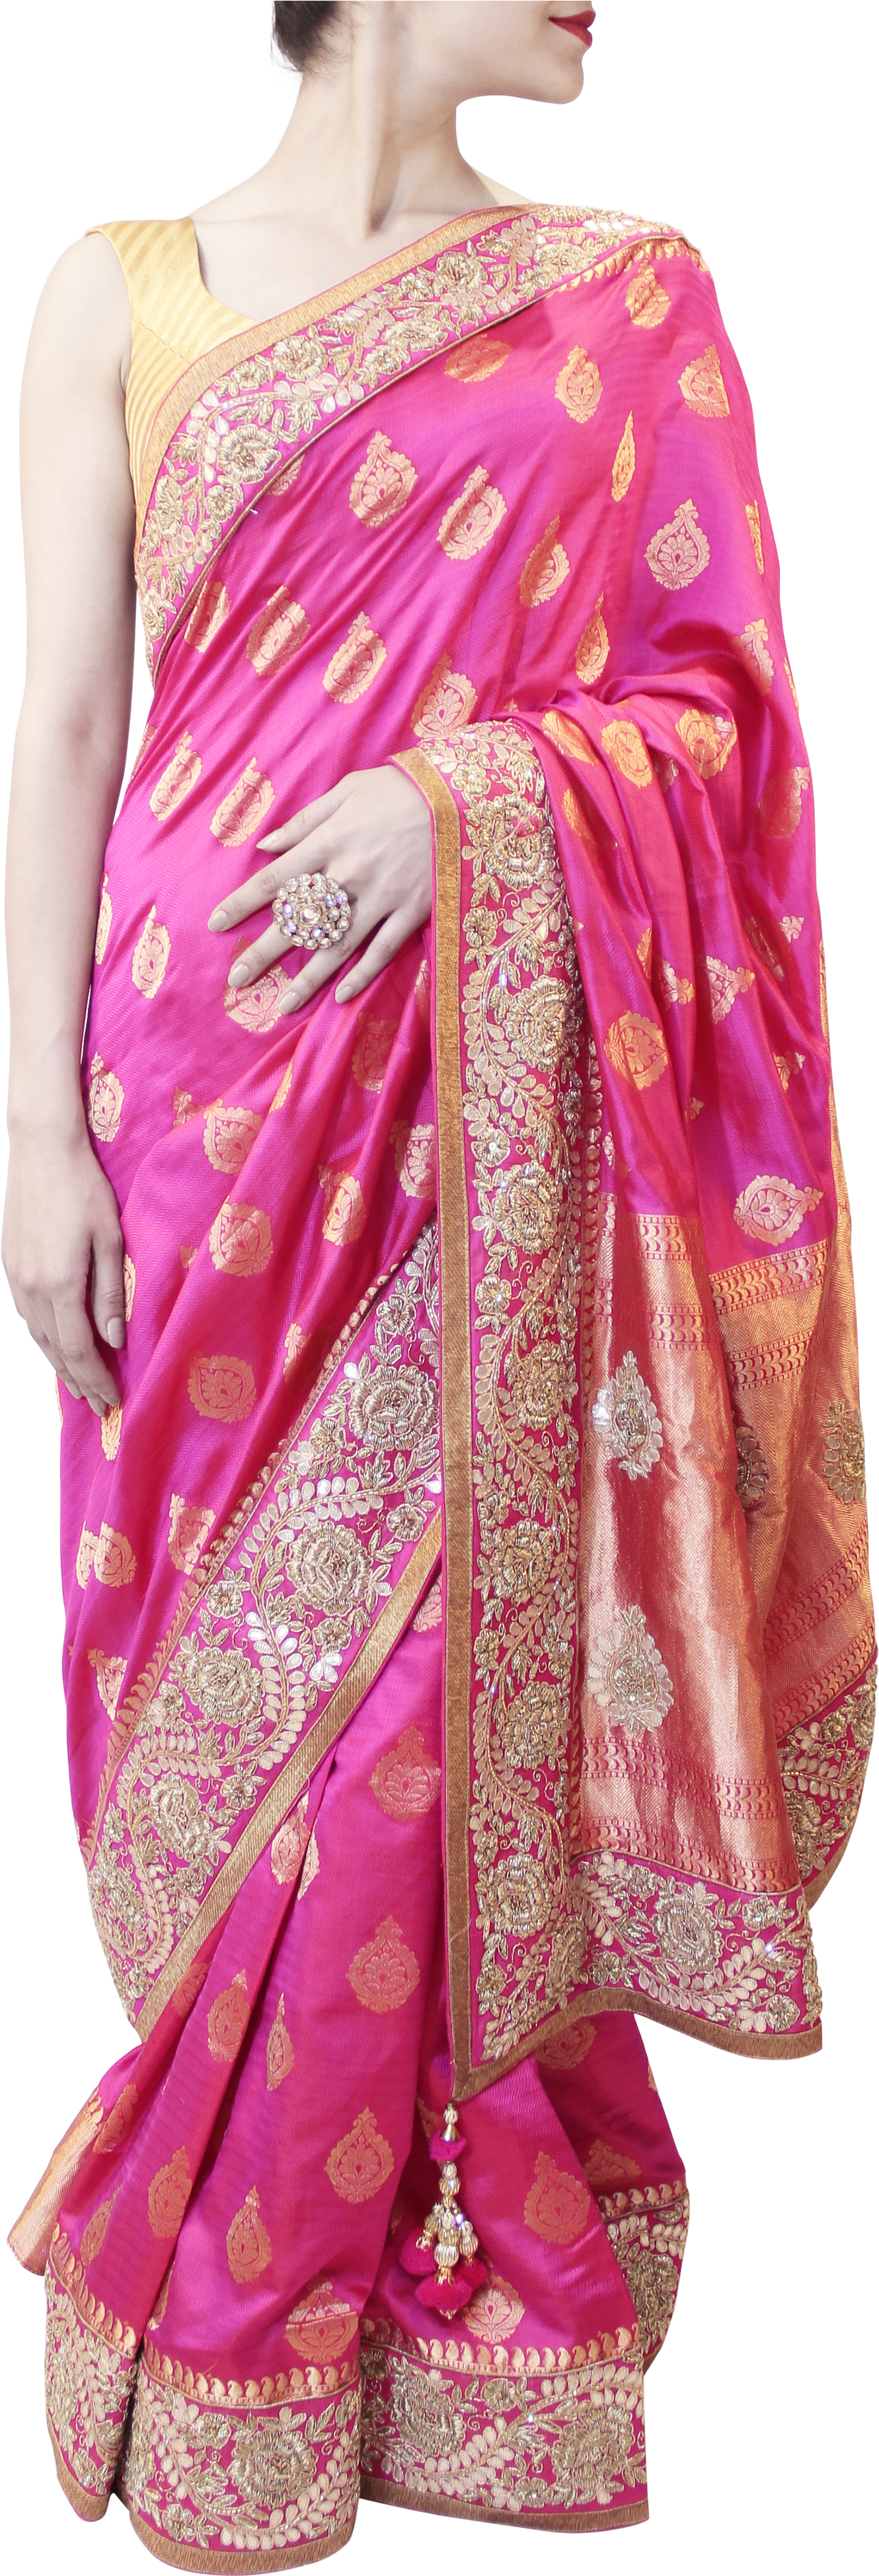 Elegant Pink Sareewith Golden Embroidery